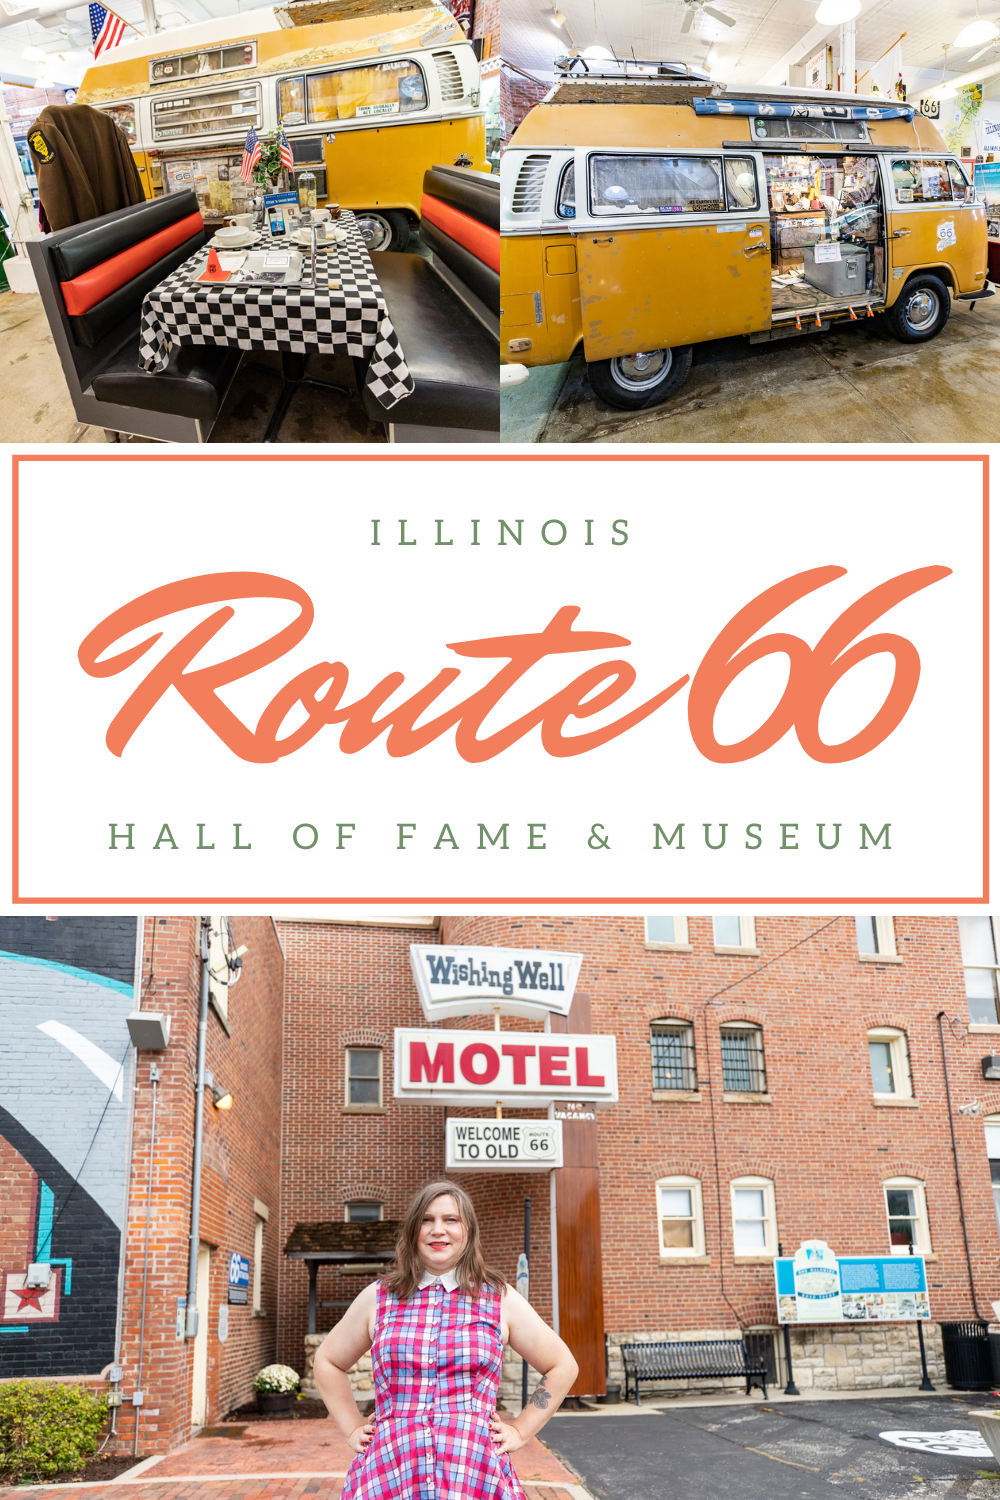 The Illinois Route 66 Hall of Fame & Museum in Pontic, Illinois tells the story of the Mother Road with thousands of artifacts, memorabilia, articles, and more. Stop in to learn about all of the famed stops, places, and people who have been inducted into the Illinois Route 66 Hall of Fame.  #RoadTrips #RoadTripStop #Route66 #Route66RoadTrip #IllinoisRoute66 #Illinois #IllinoisRoadTrip #IllinoisRoadsideAttractions #RoadsideAttractions #RoadsideAttraction #RoadsideAmerica #RoadTrip